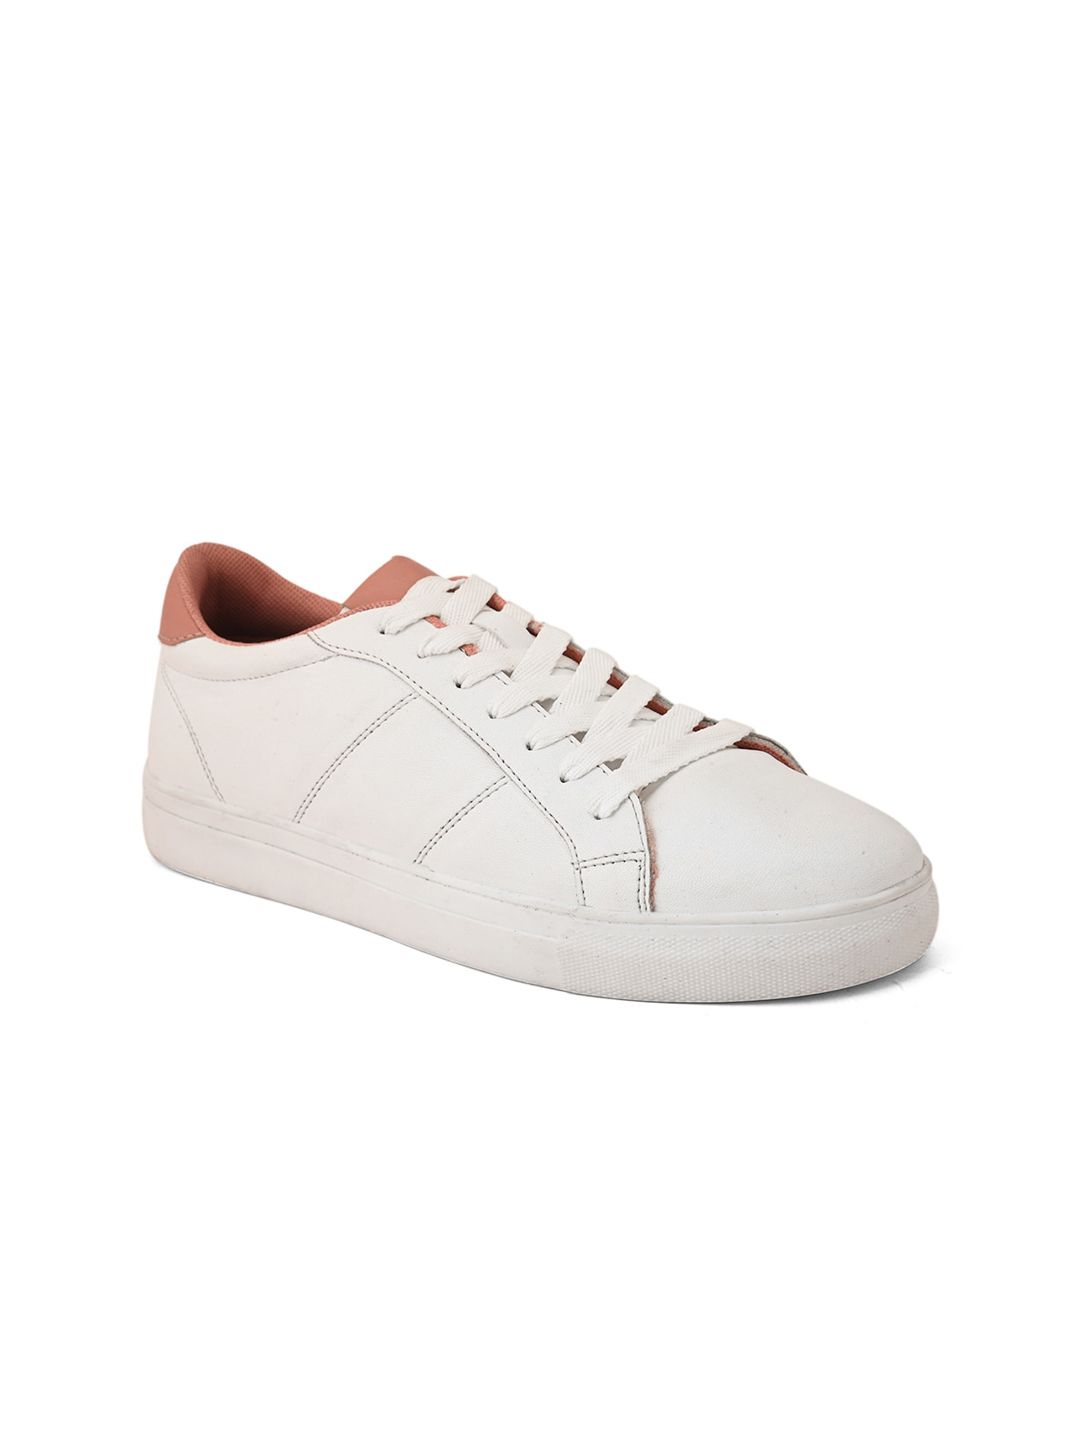 Roadster Women Lightweight Casual Sneakers Price in India